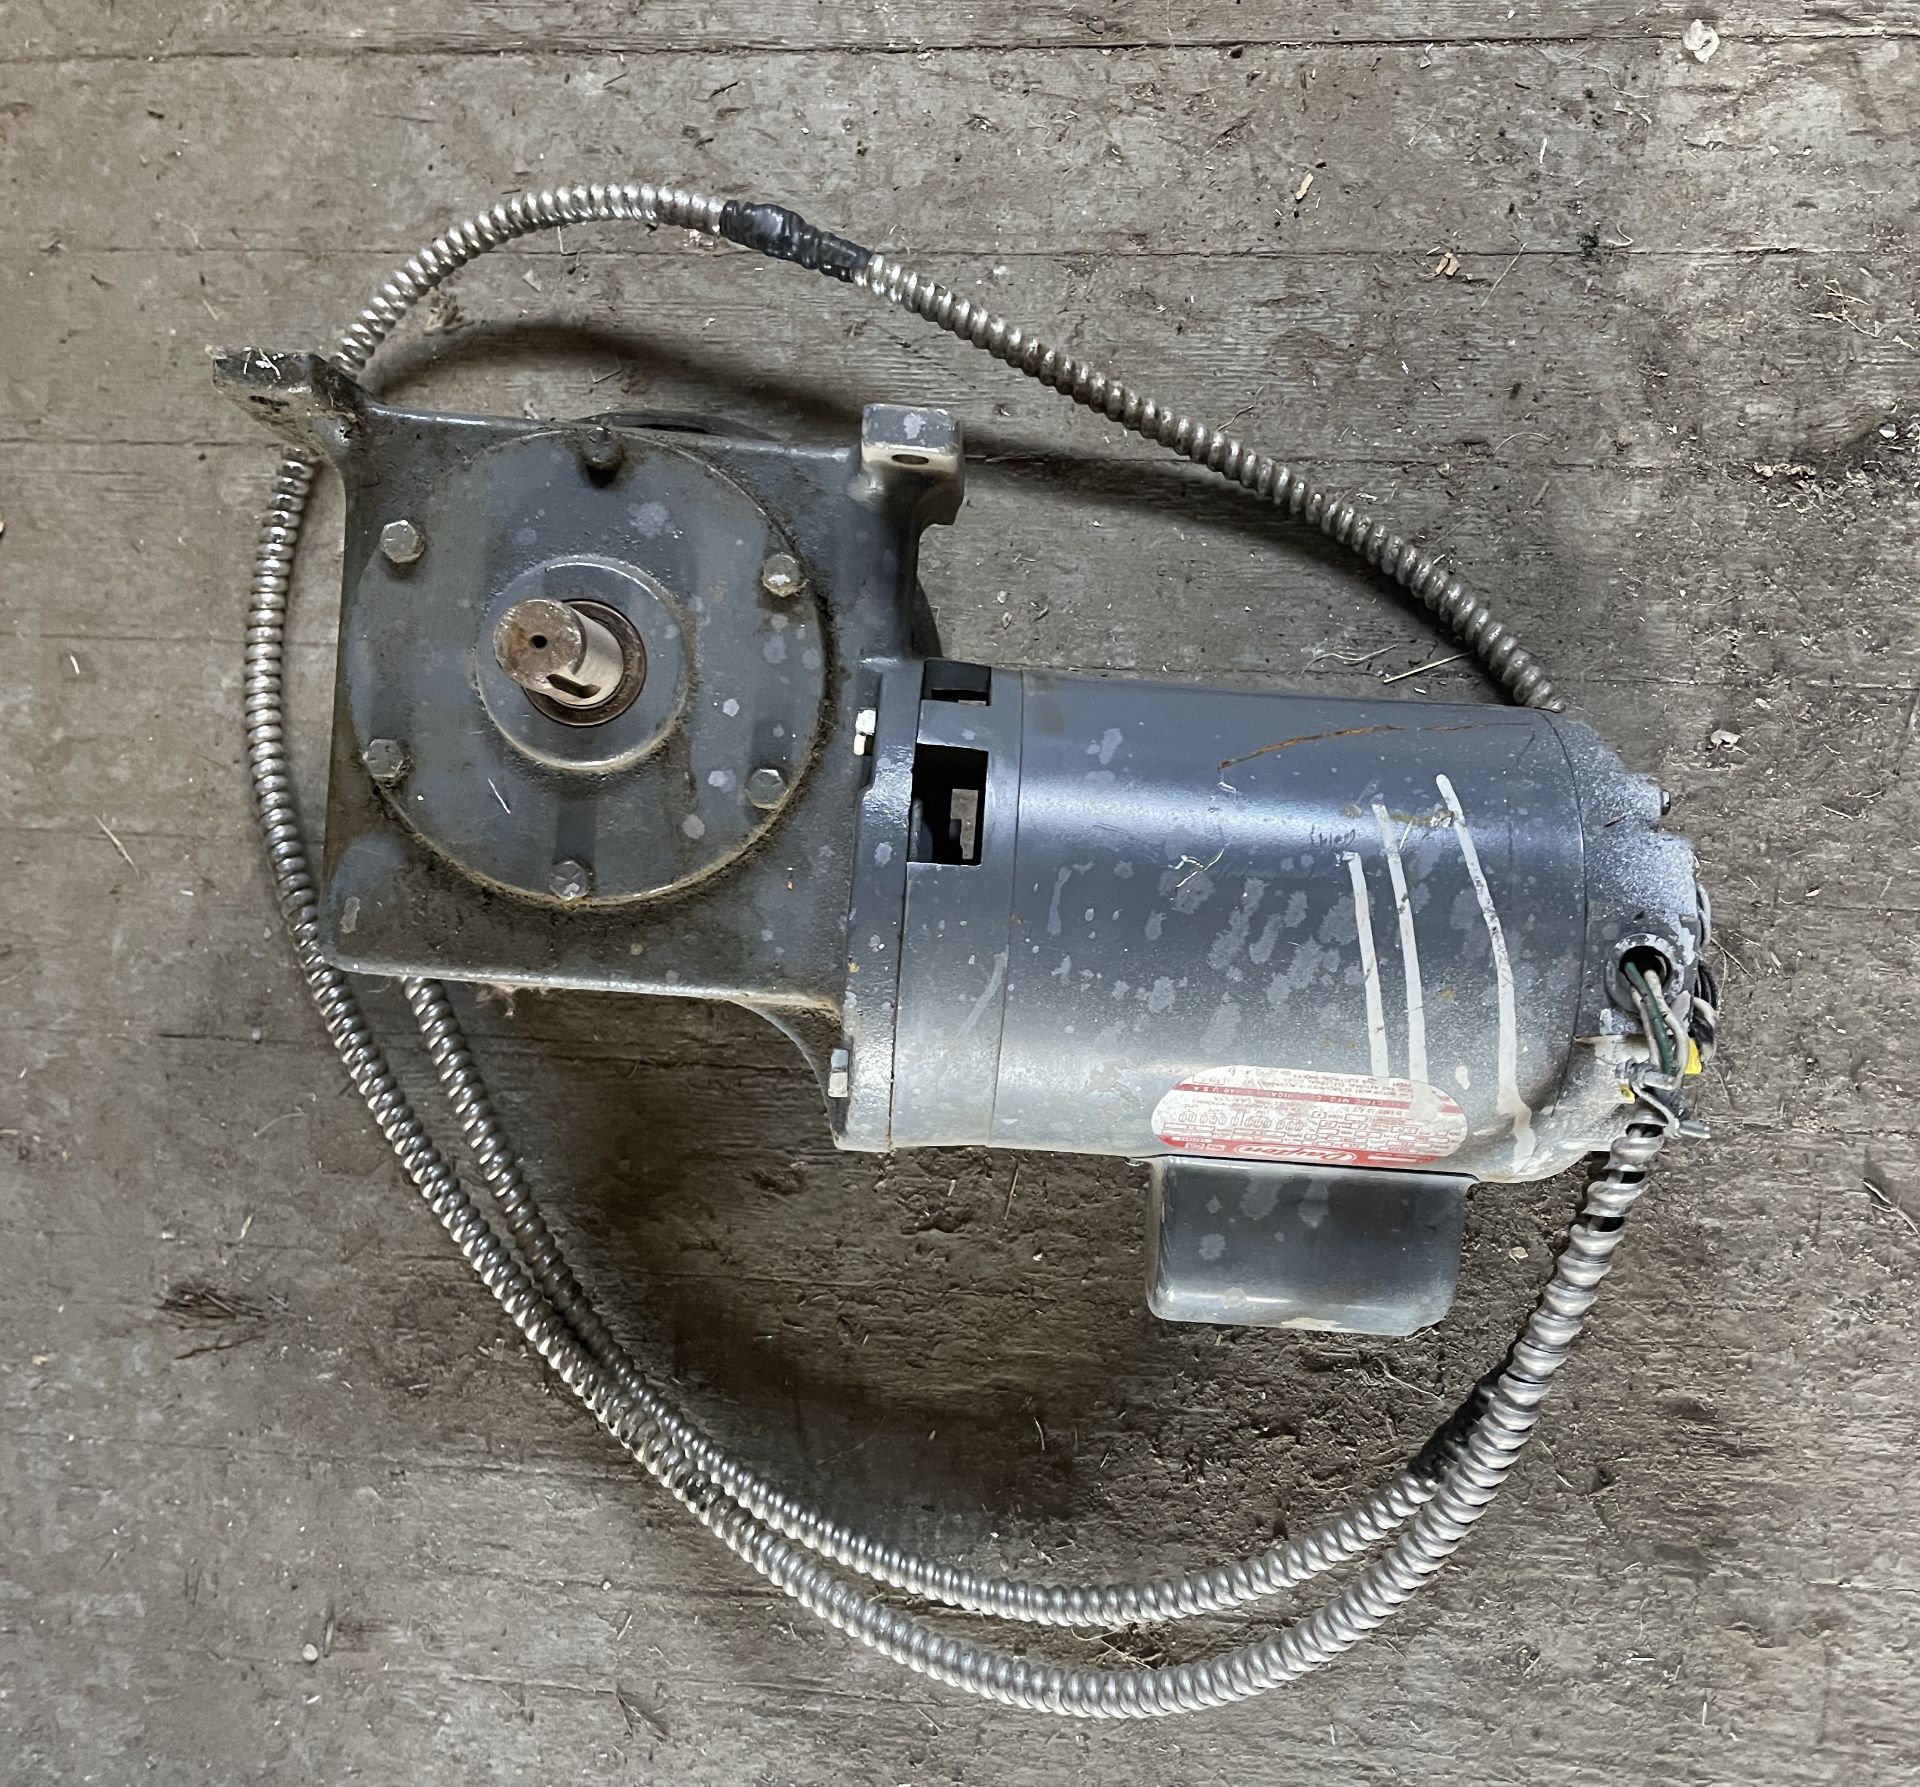 SMALL DAYTON MOTOR WITH WIRE ATTACHED